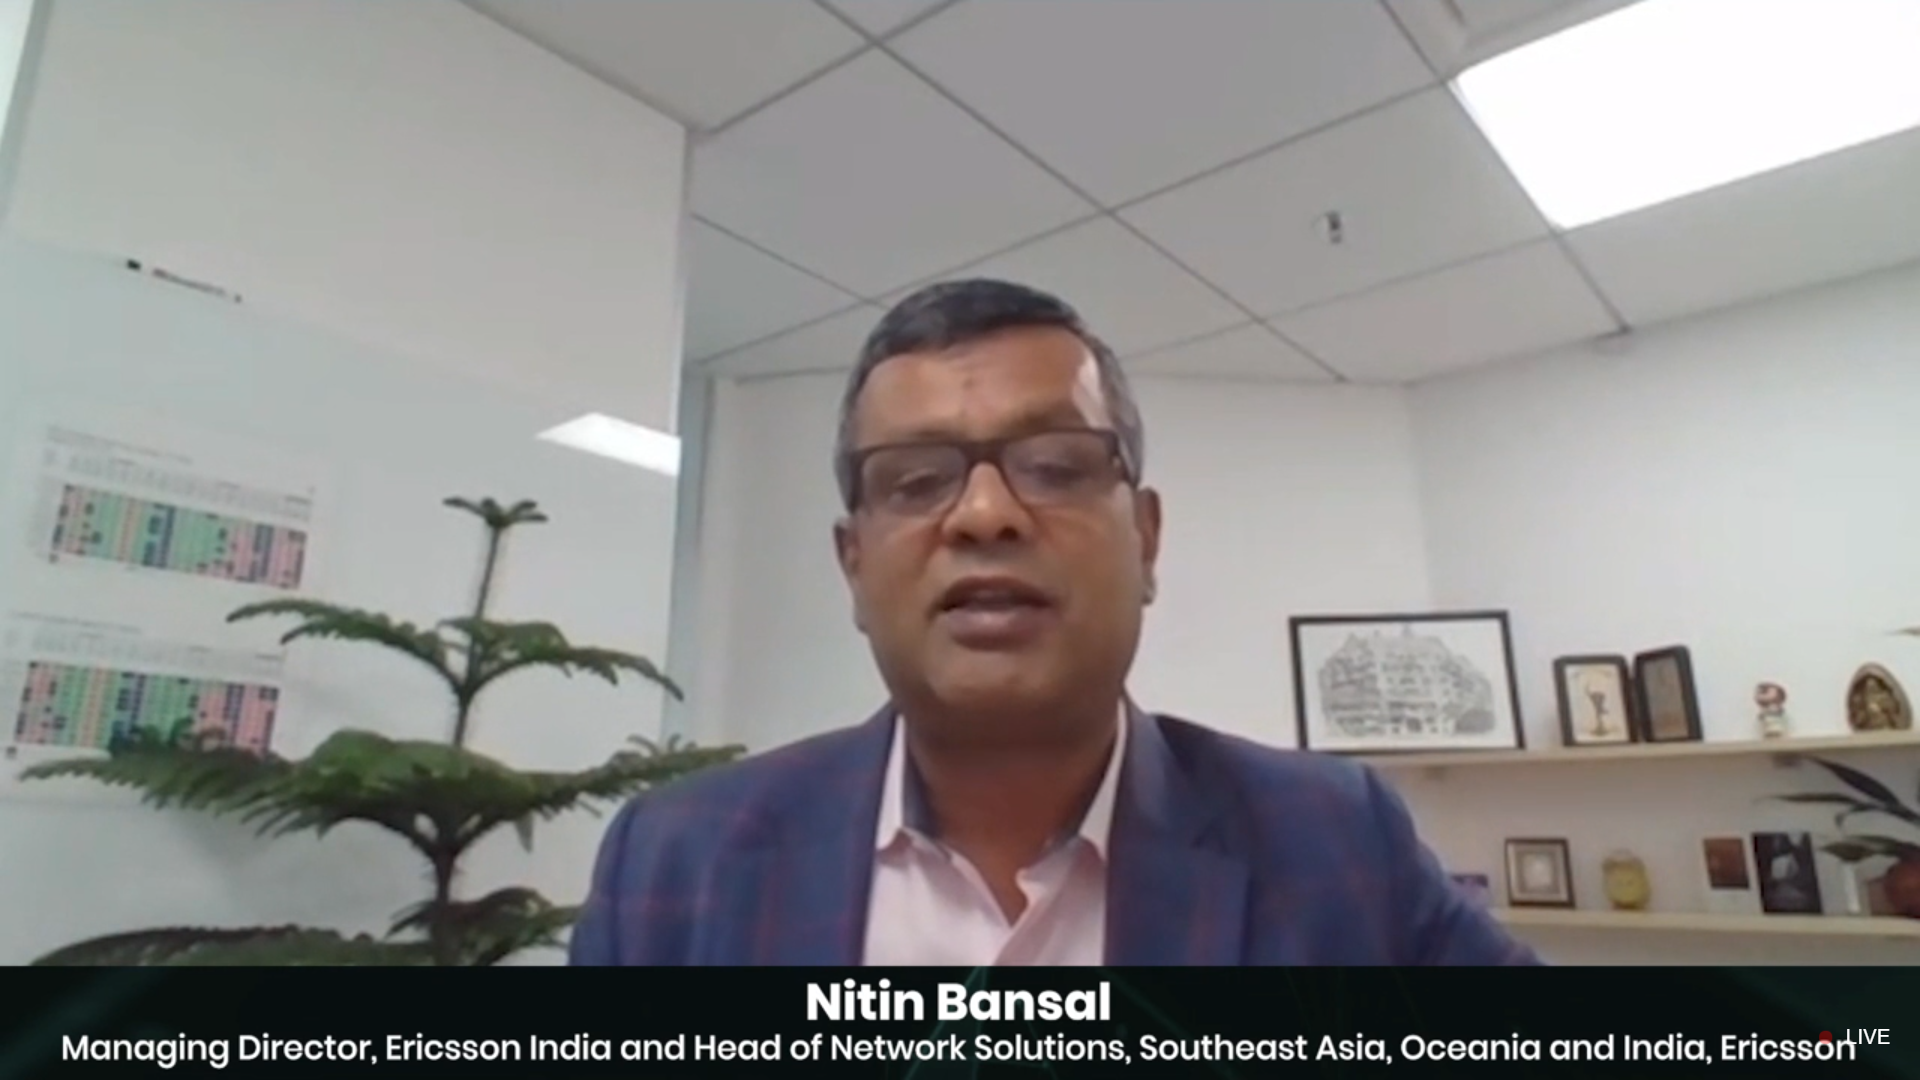 Nitin Bansal, Managing Director, Ericsson India and Head of Network Solutions, Southeast Asia, Oceania and India, Ericsson. 